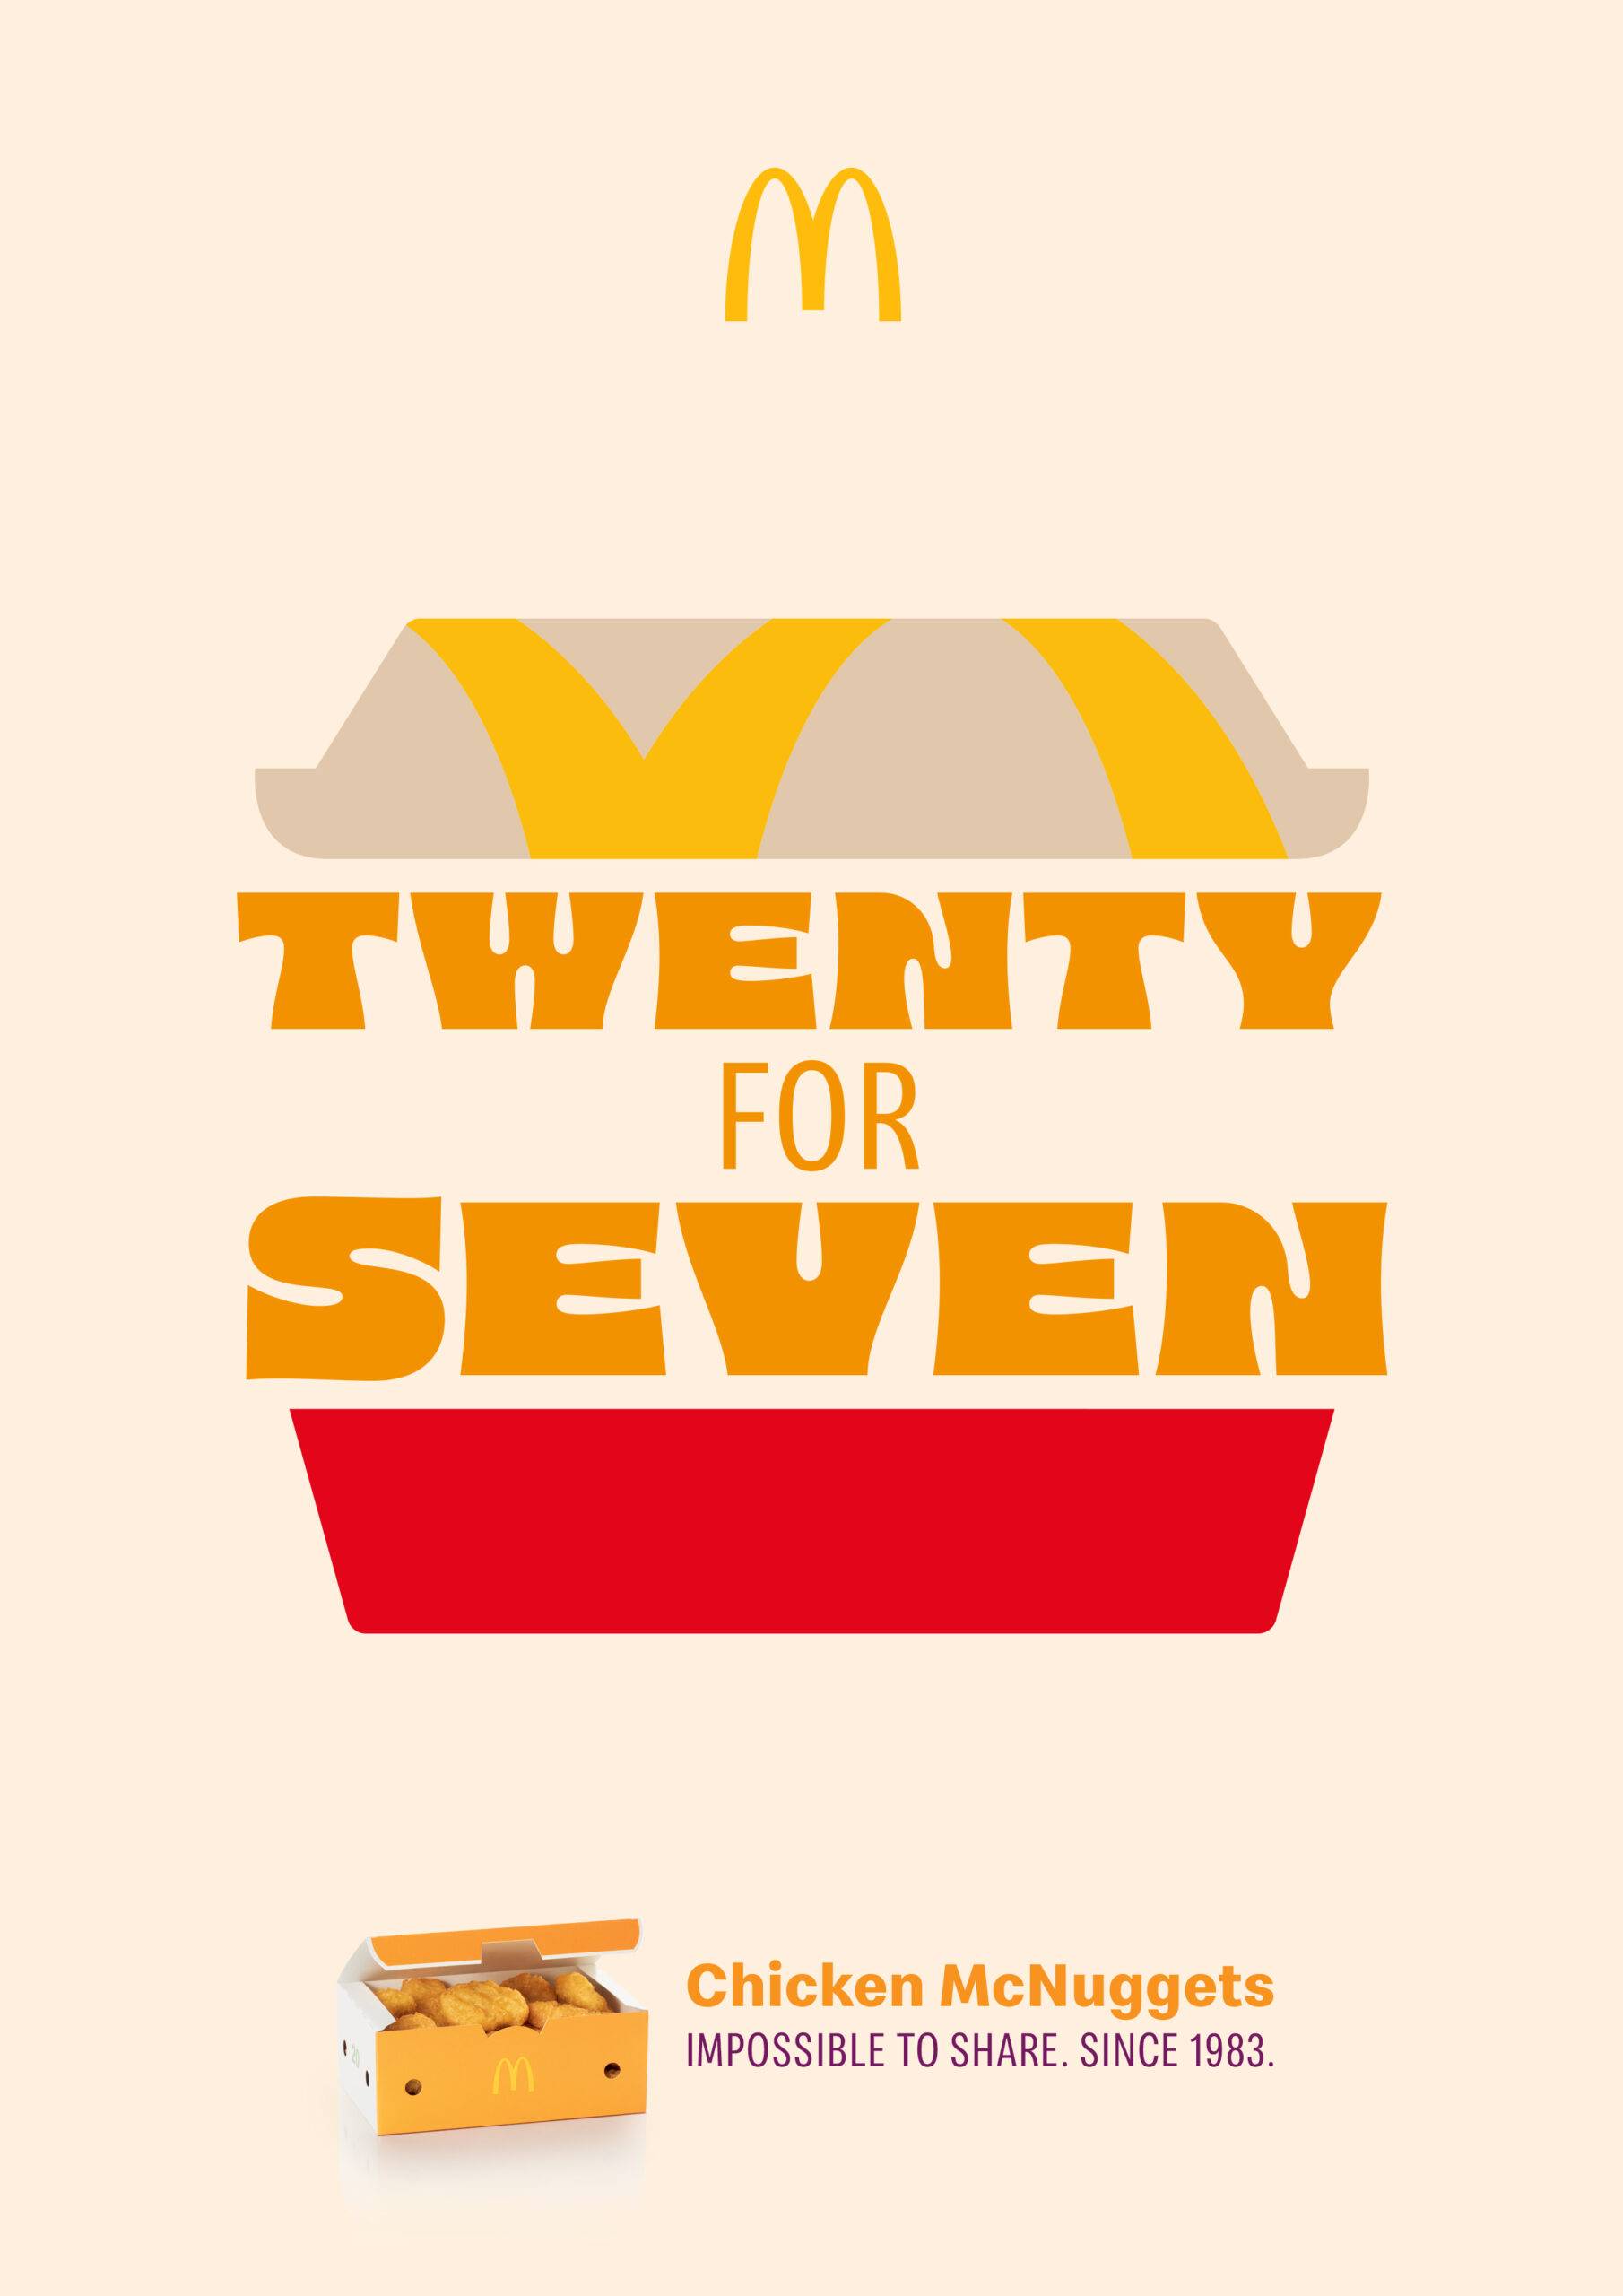 A poster of a McNuggets box that say "Six for Four: Chicken McNuggets, Impossible to share since 1983"